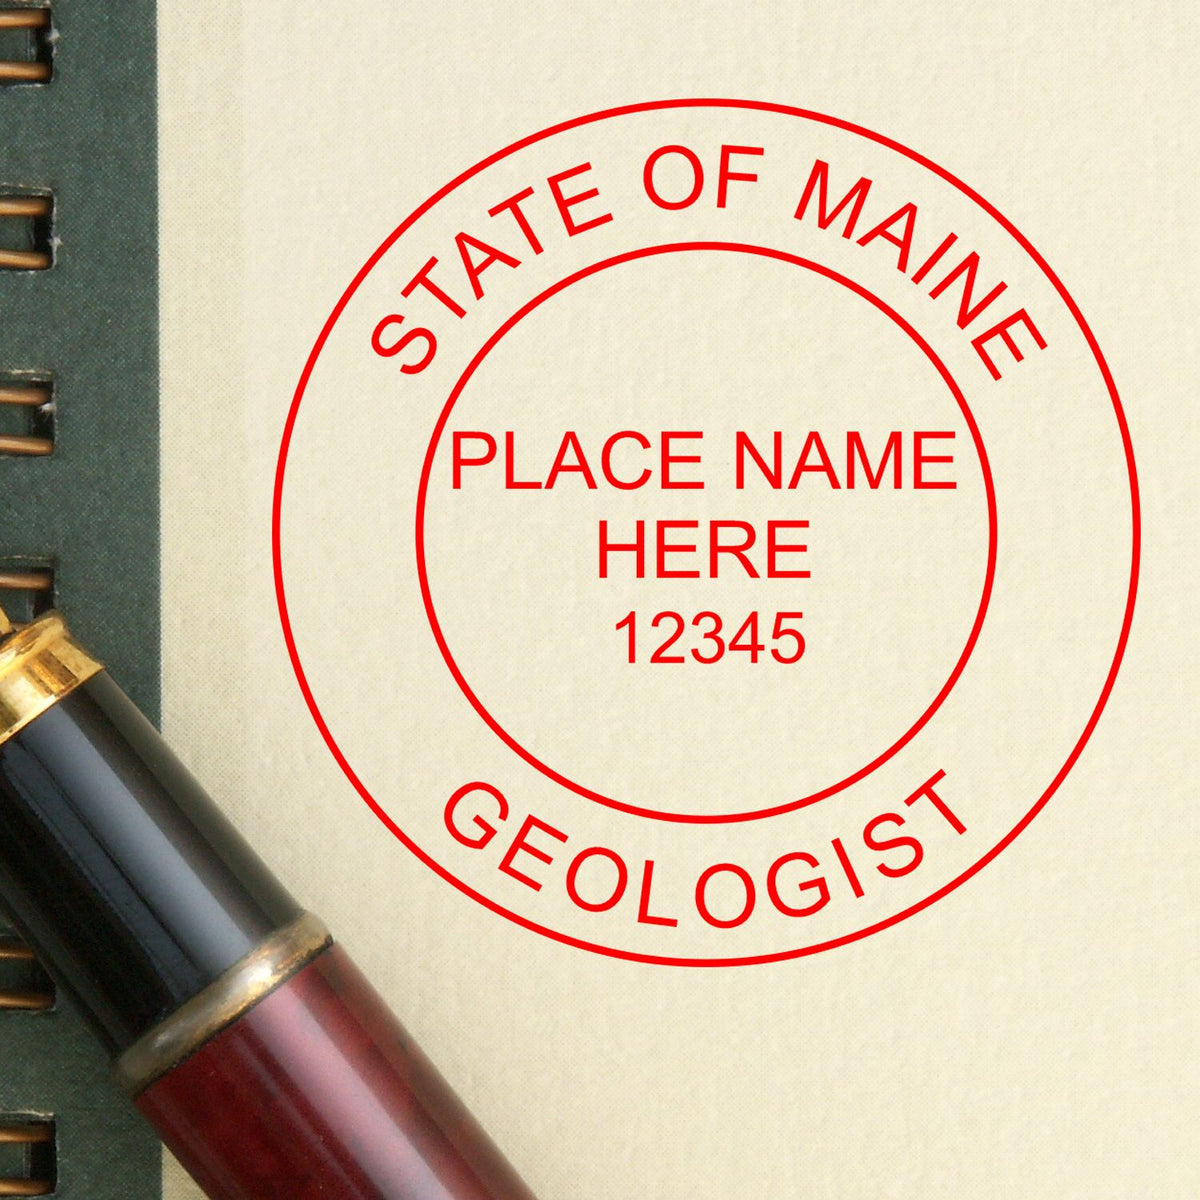 Another Example of a stamped impression of the Self-Inking Maine Geologist Stamp on a office form